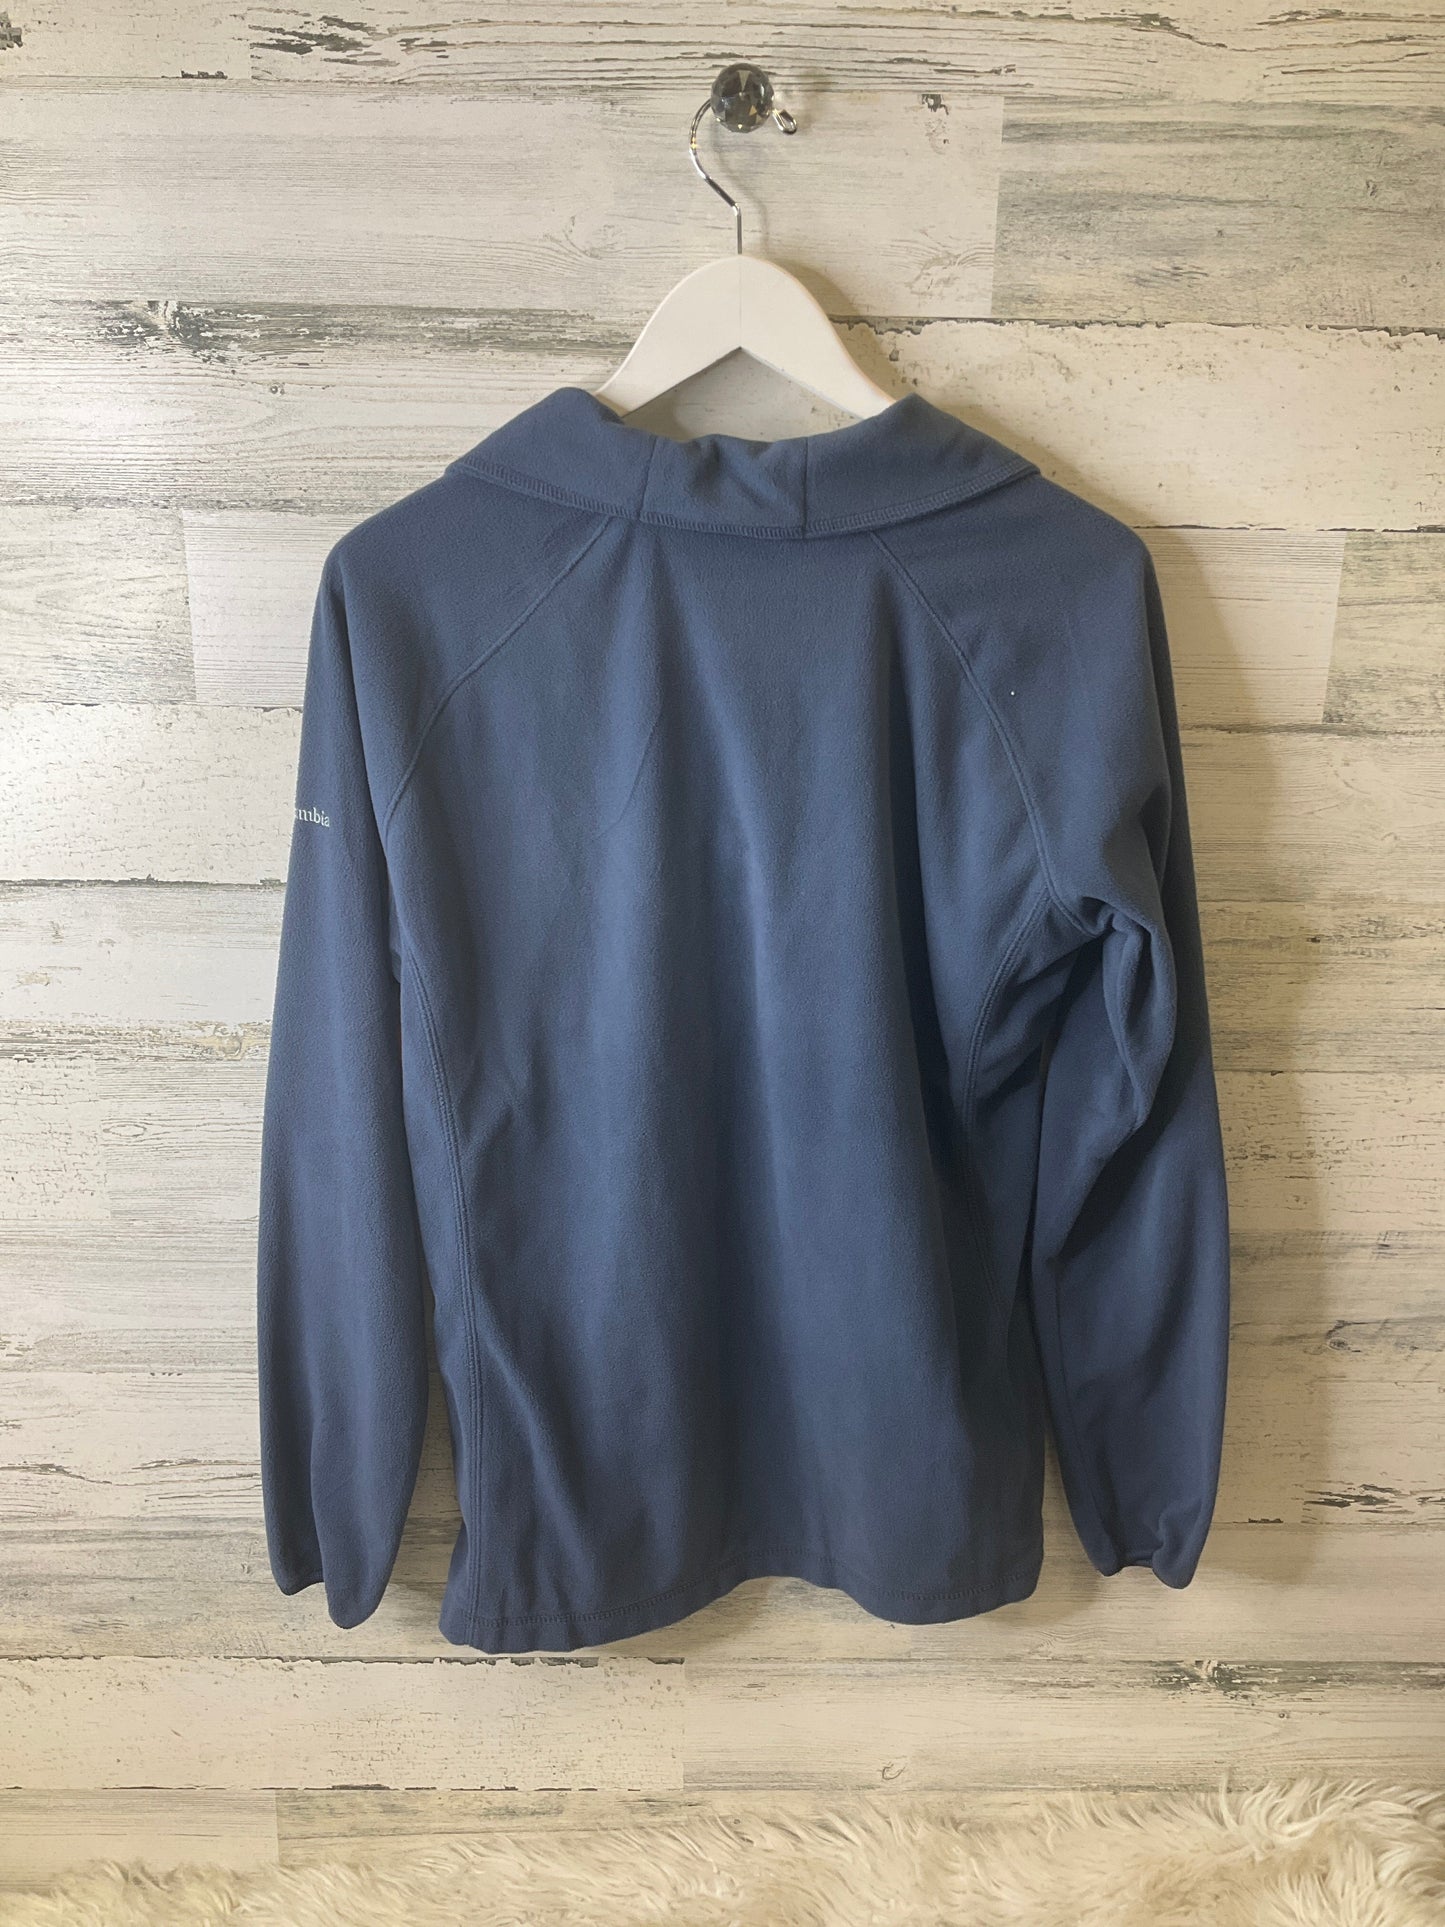 Top Long Sleeve Fleece Pullover By Columbia  Size: Xl